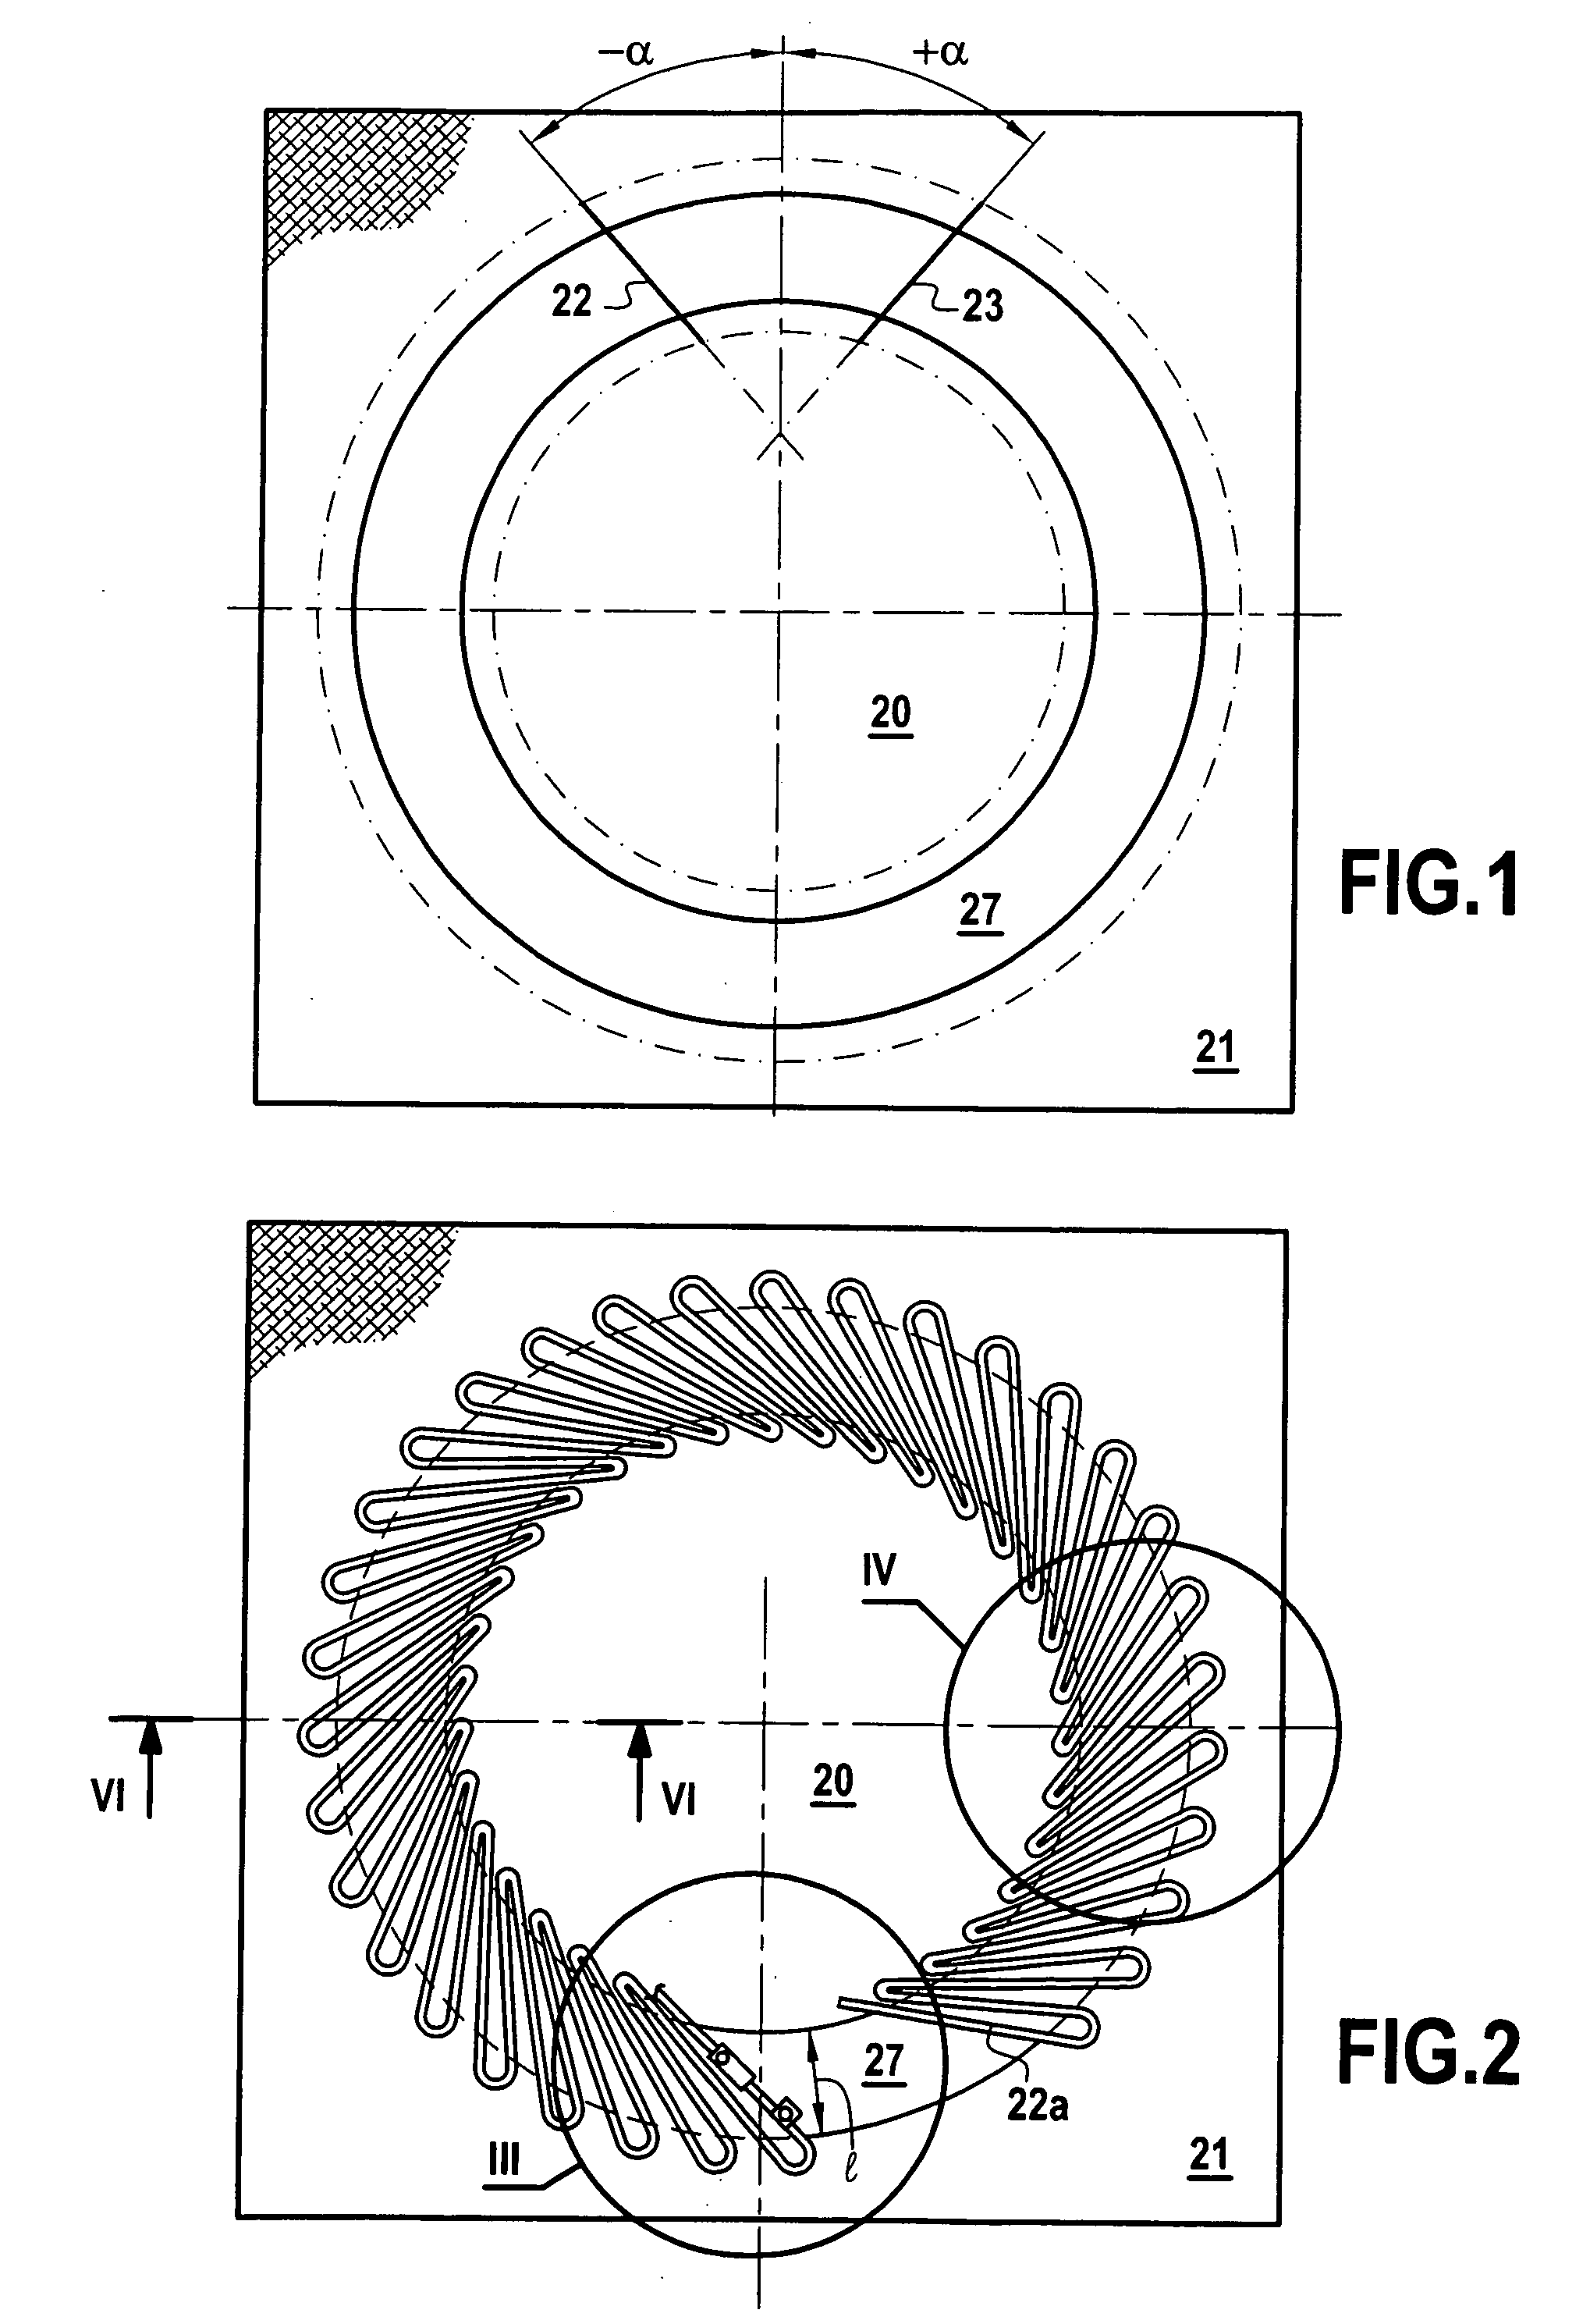 Method of making a unit comprising a casing and diverging portion